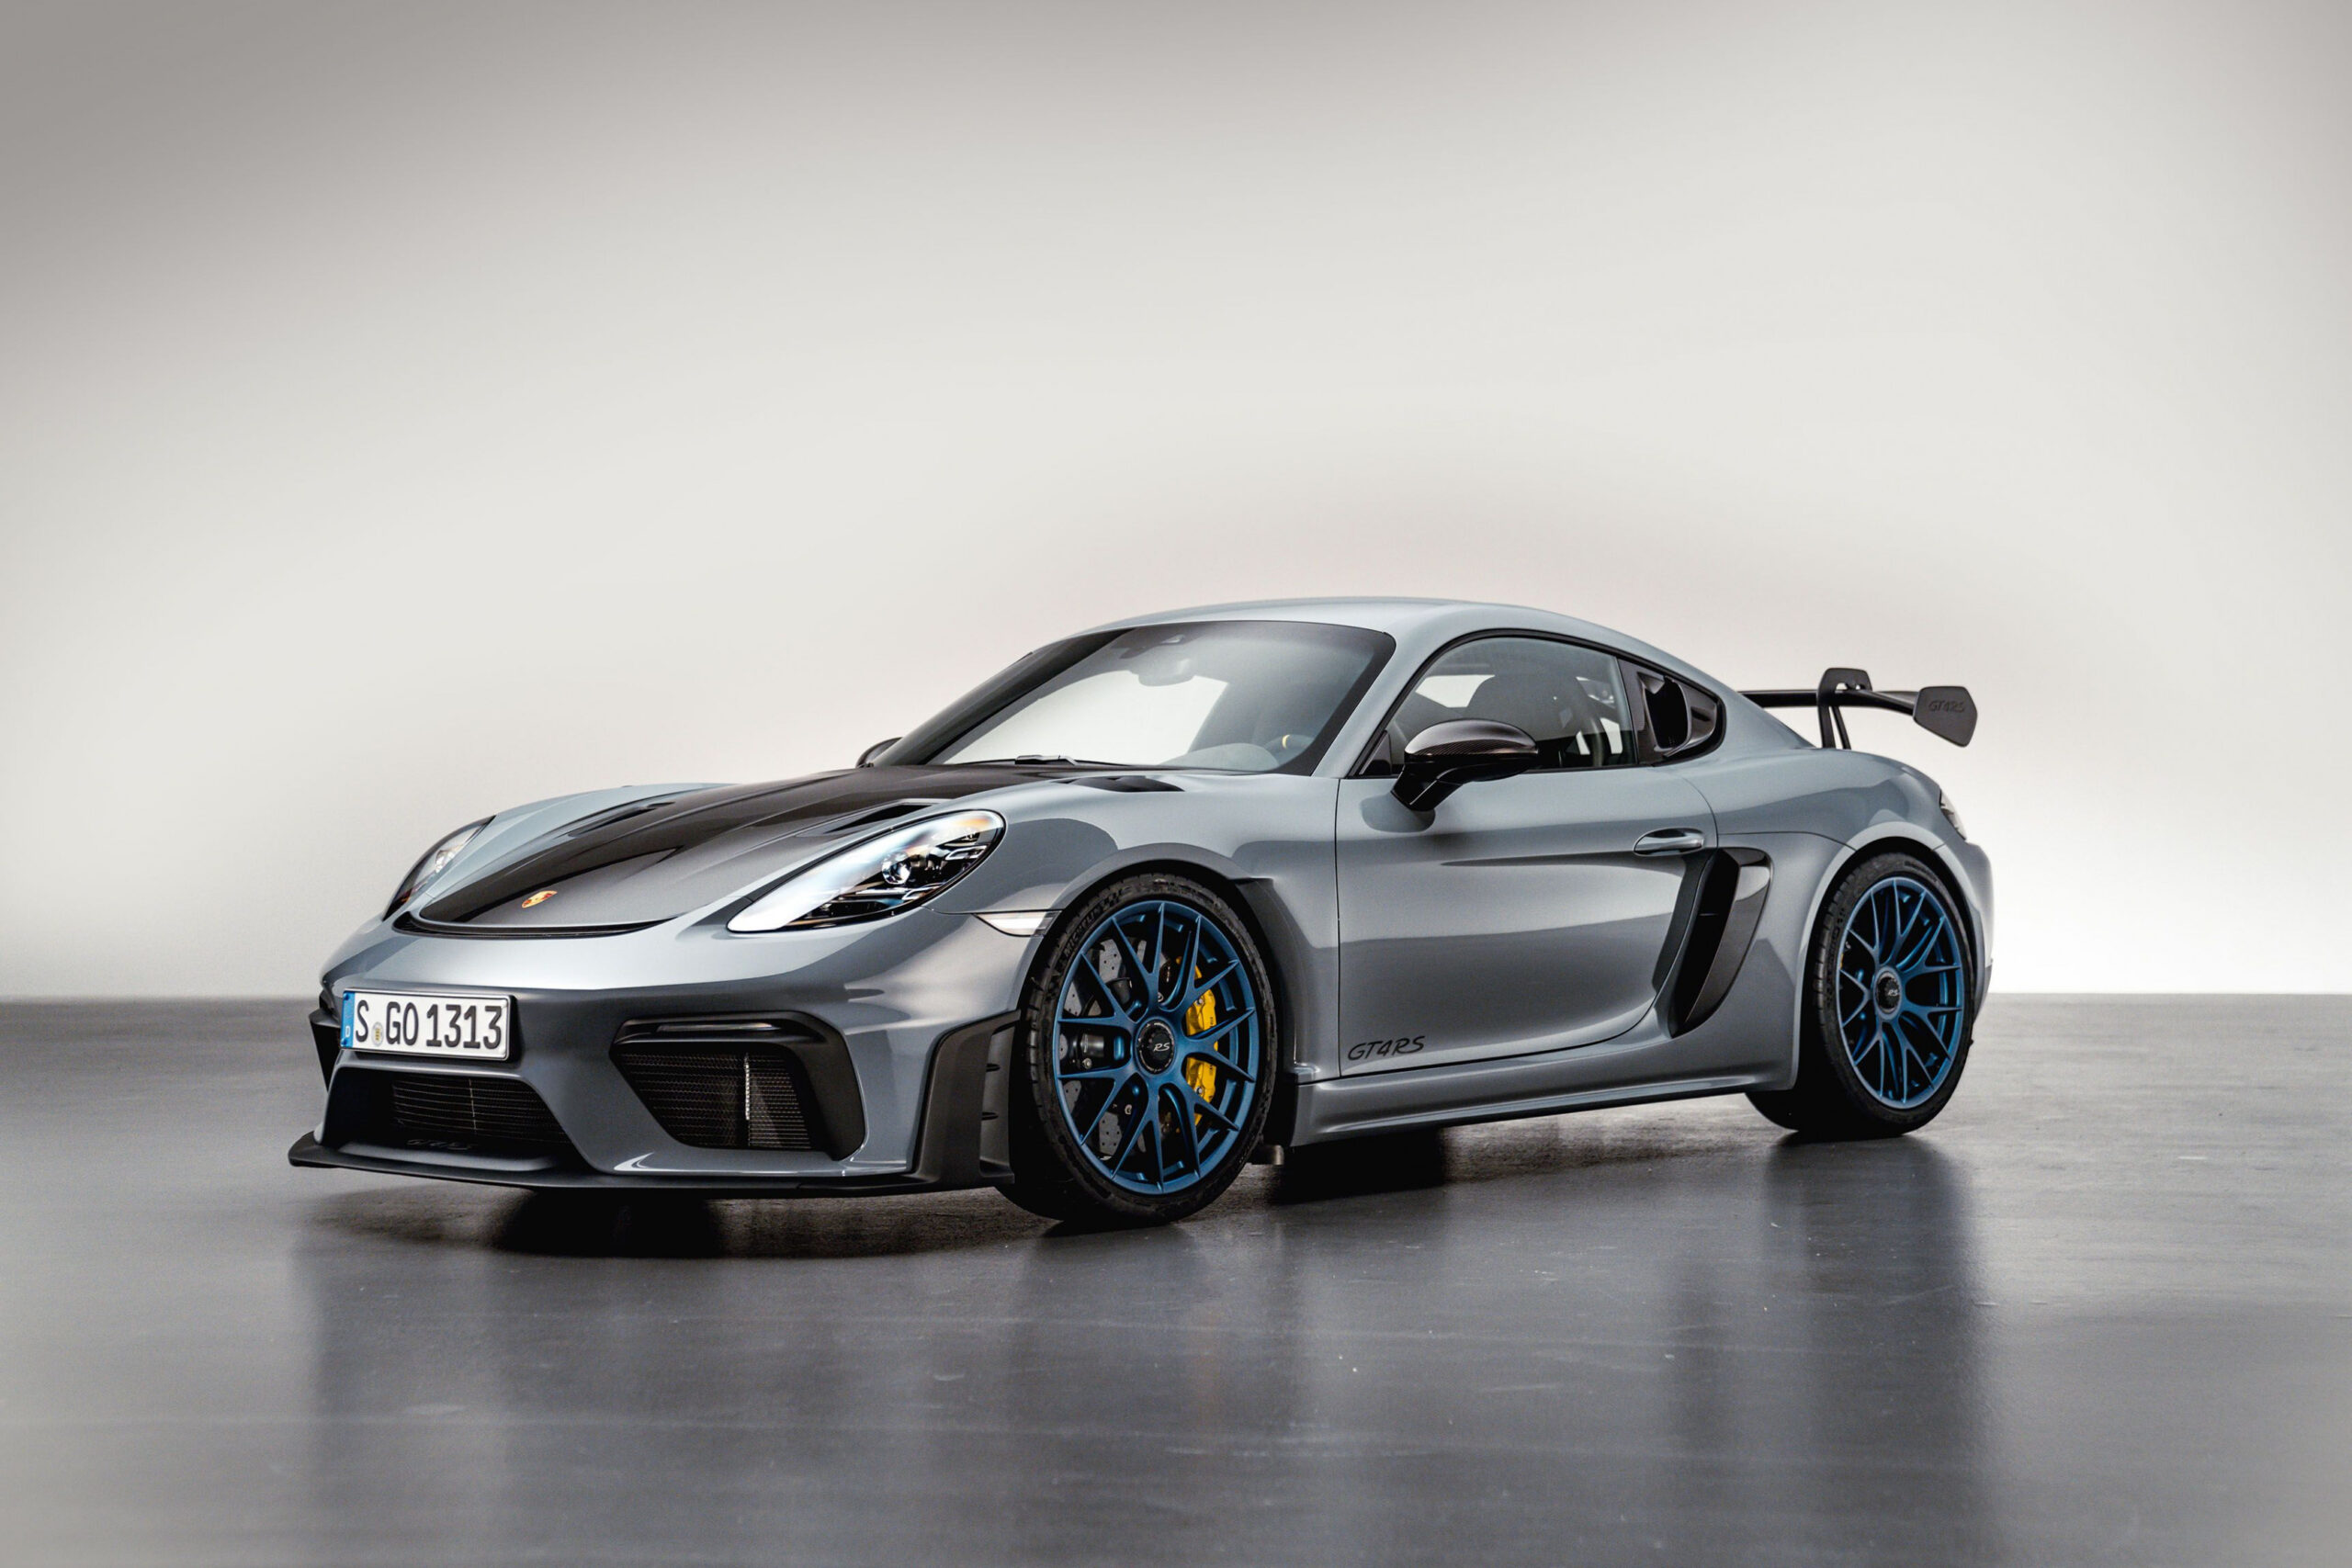 5 Porsche 5 Cayman Gt5 Rs: Everything You Need To Know 2023 Porsche 718 Cayman Price